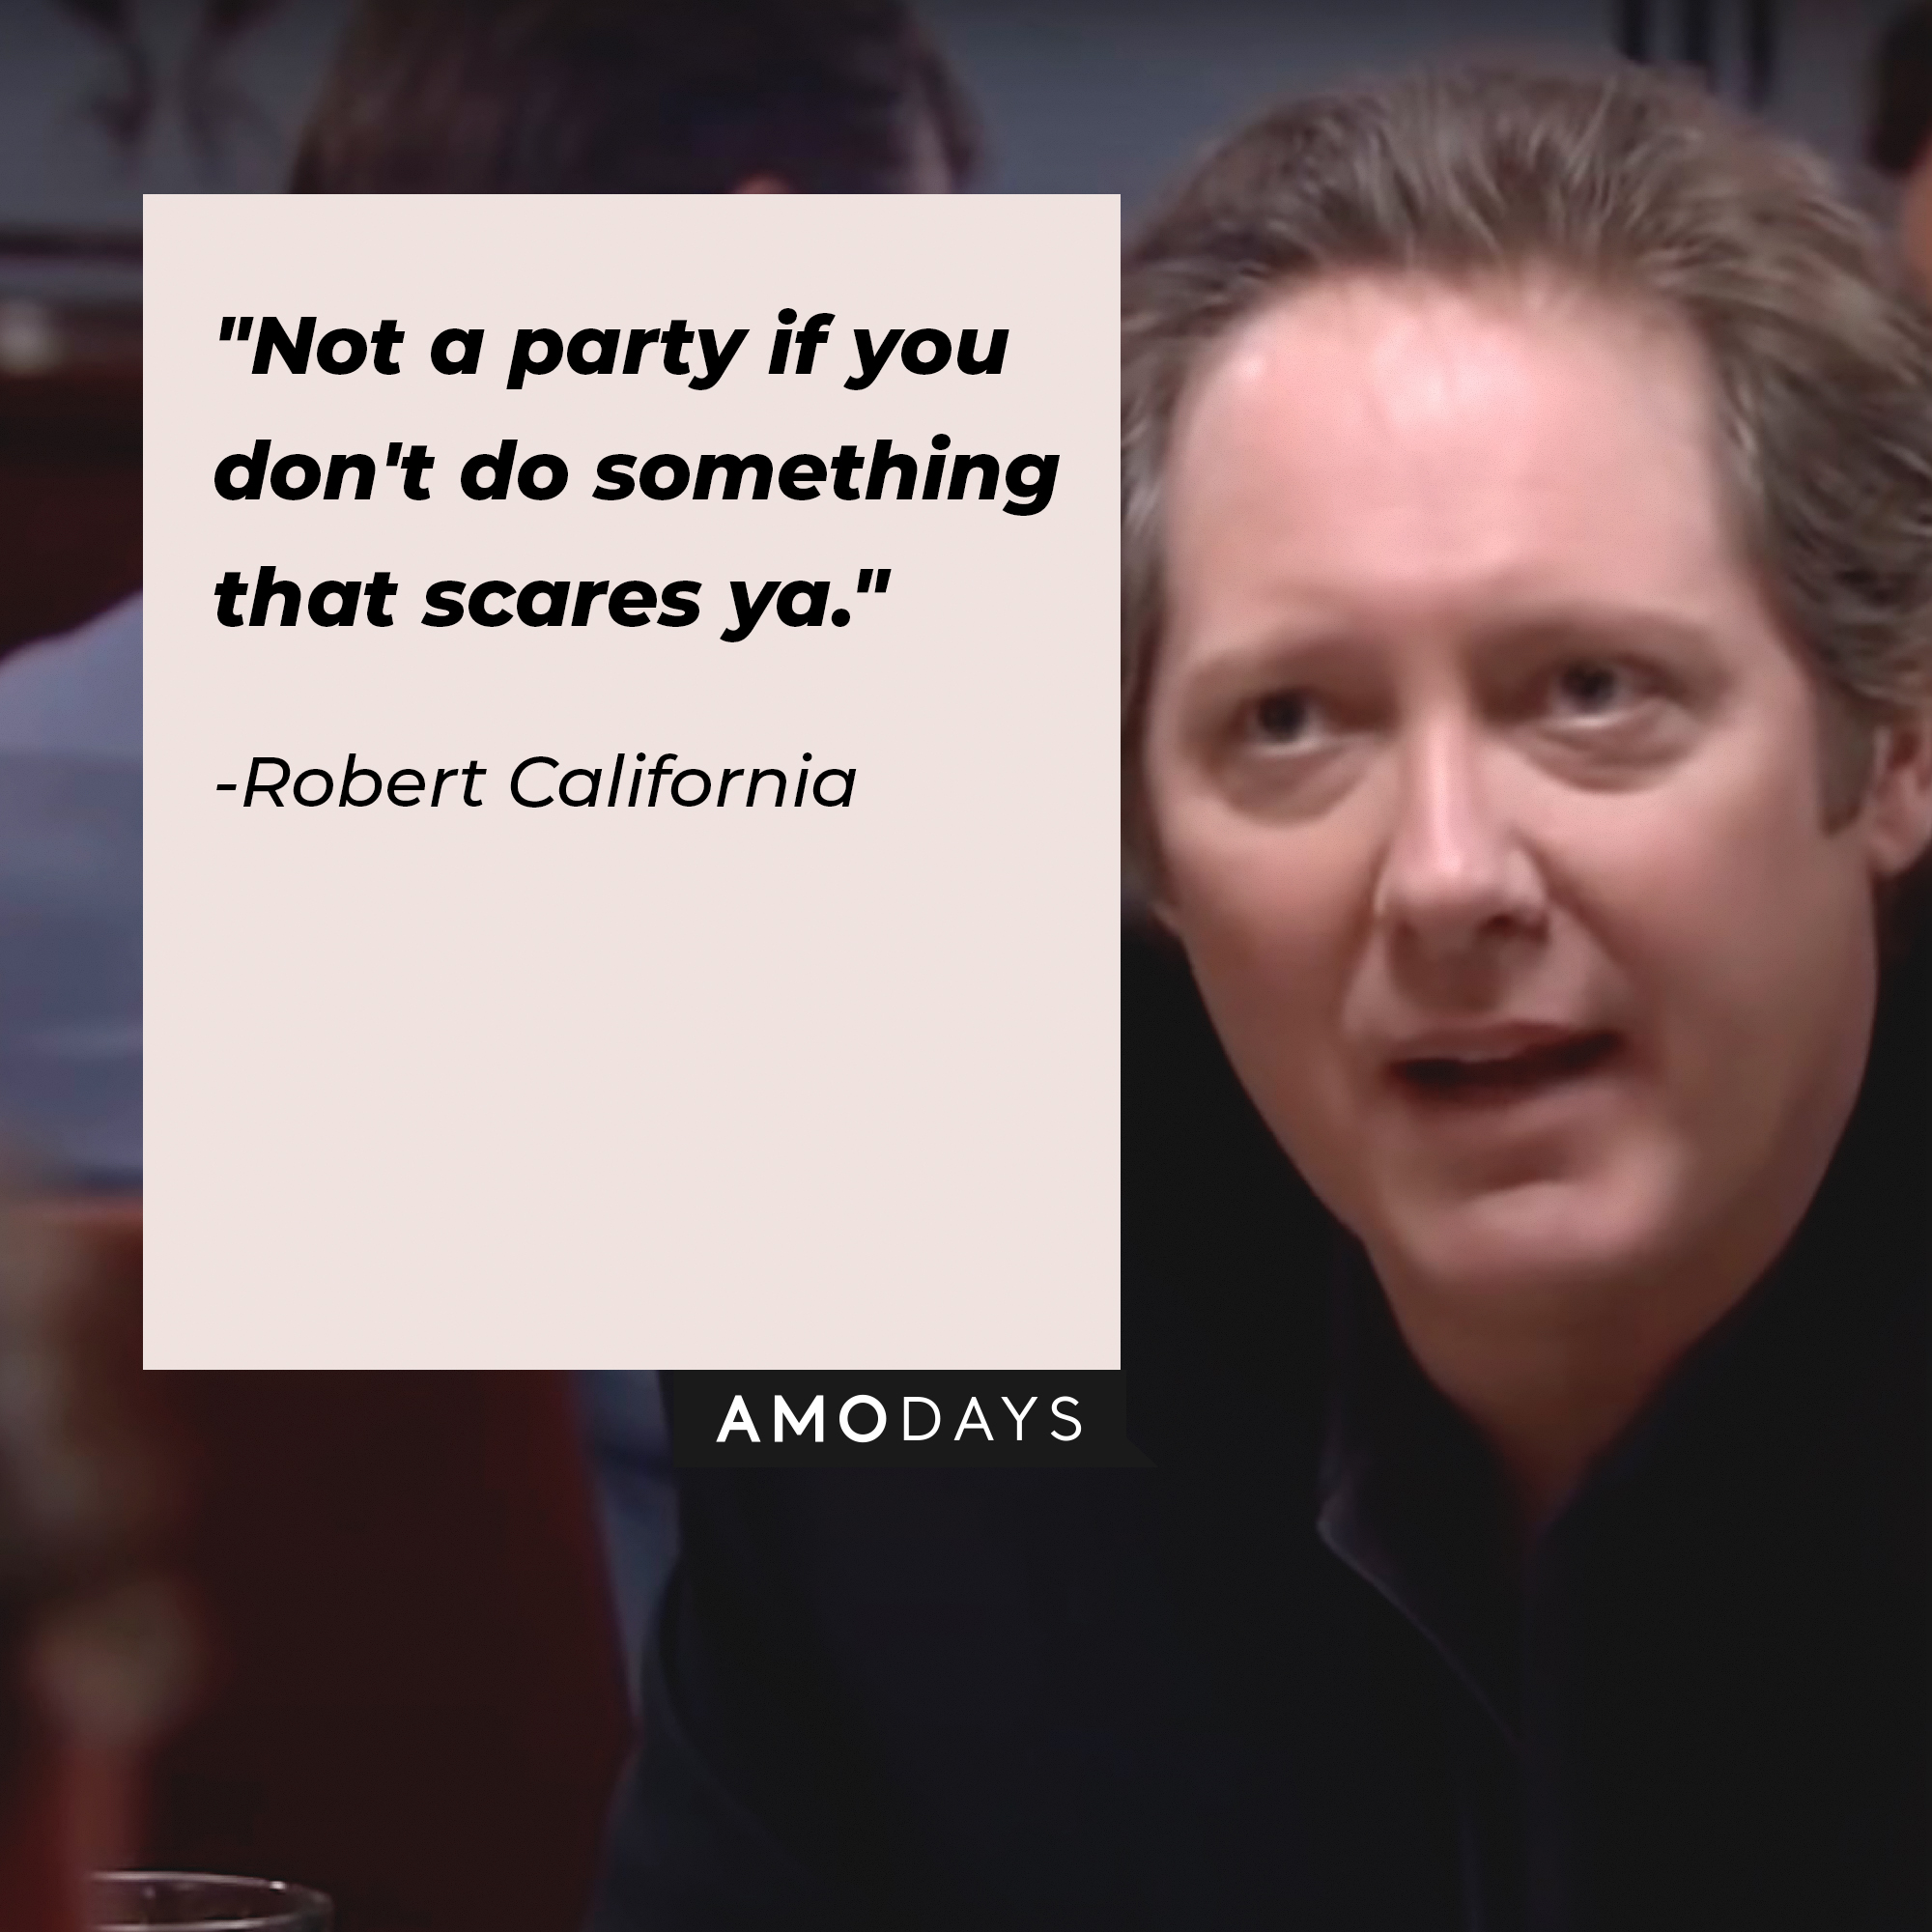 Robert California's quote: "Not a party if you don't do something that scares ya." | Image: AmoDays